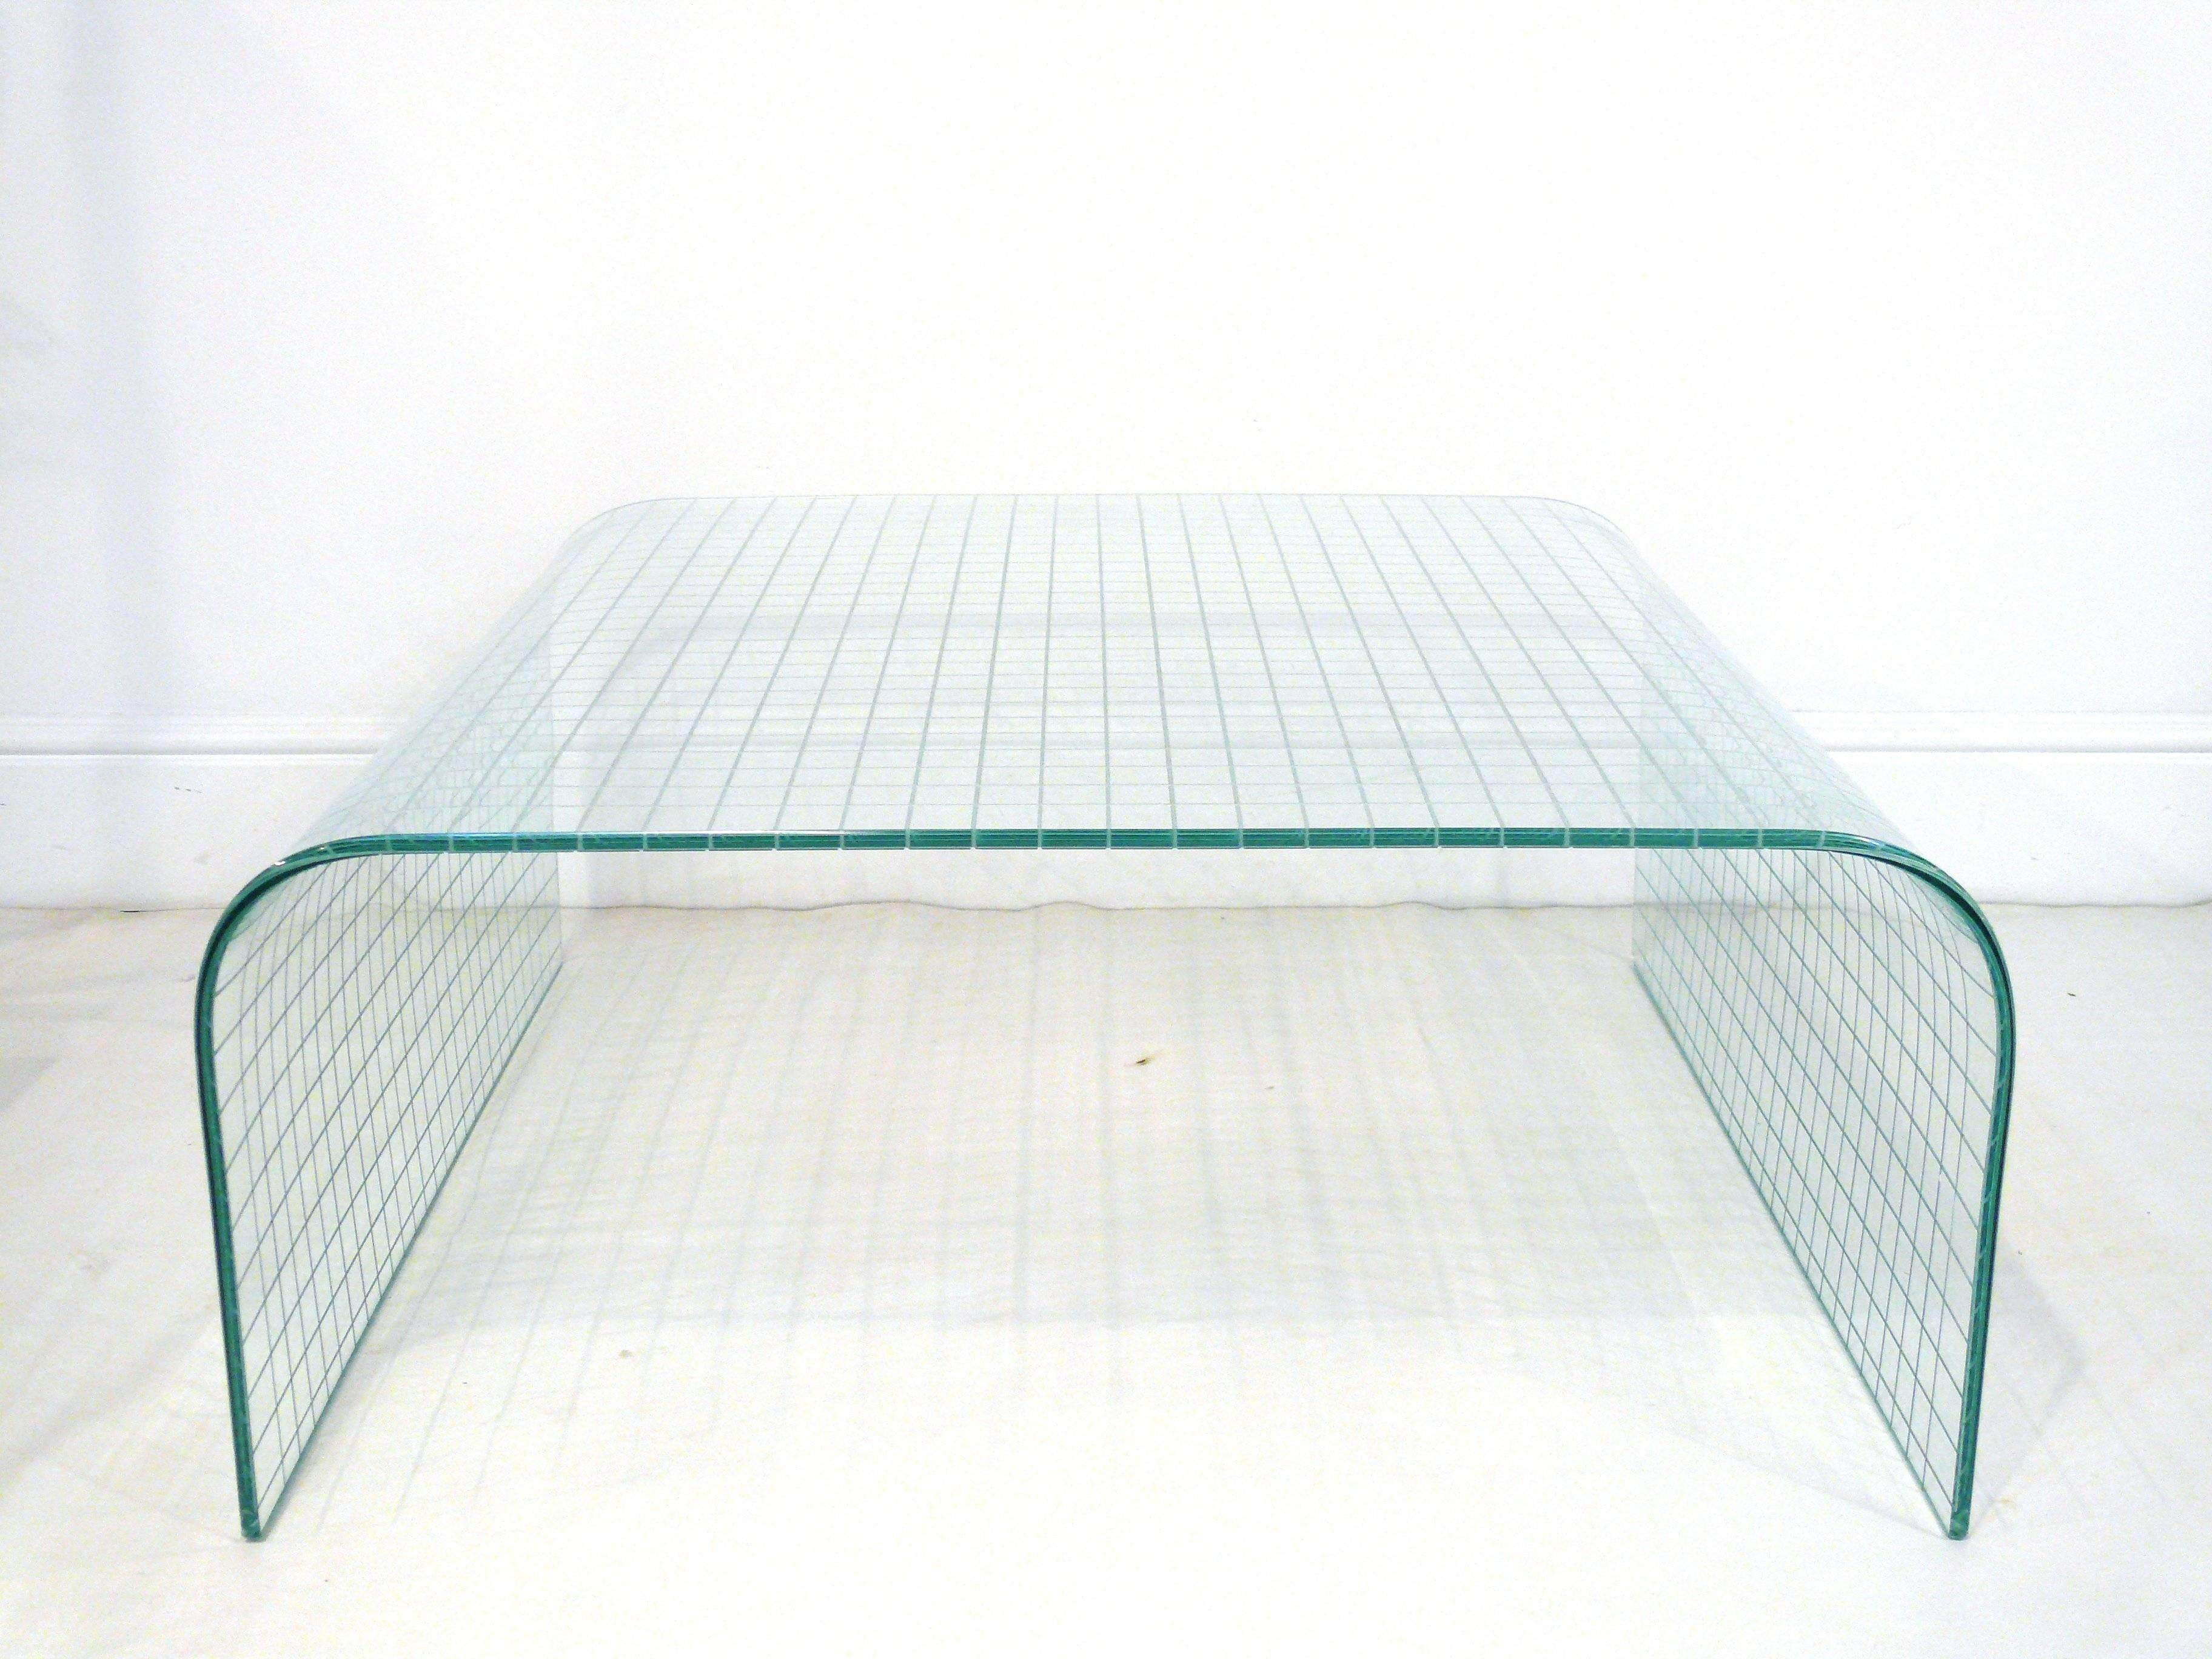 Fiam Style scored glass waterfall coffee table. Table has a unique grooved grid pattern throughout.